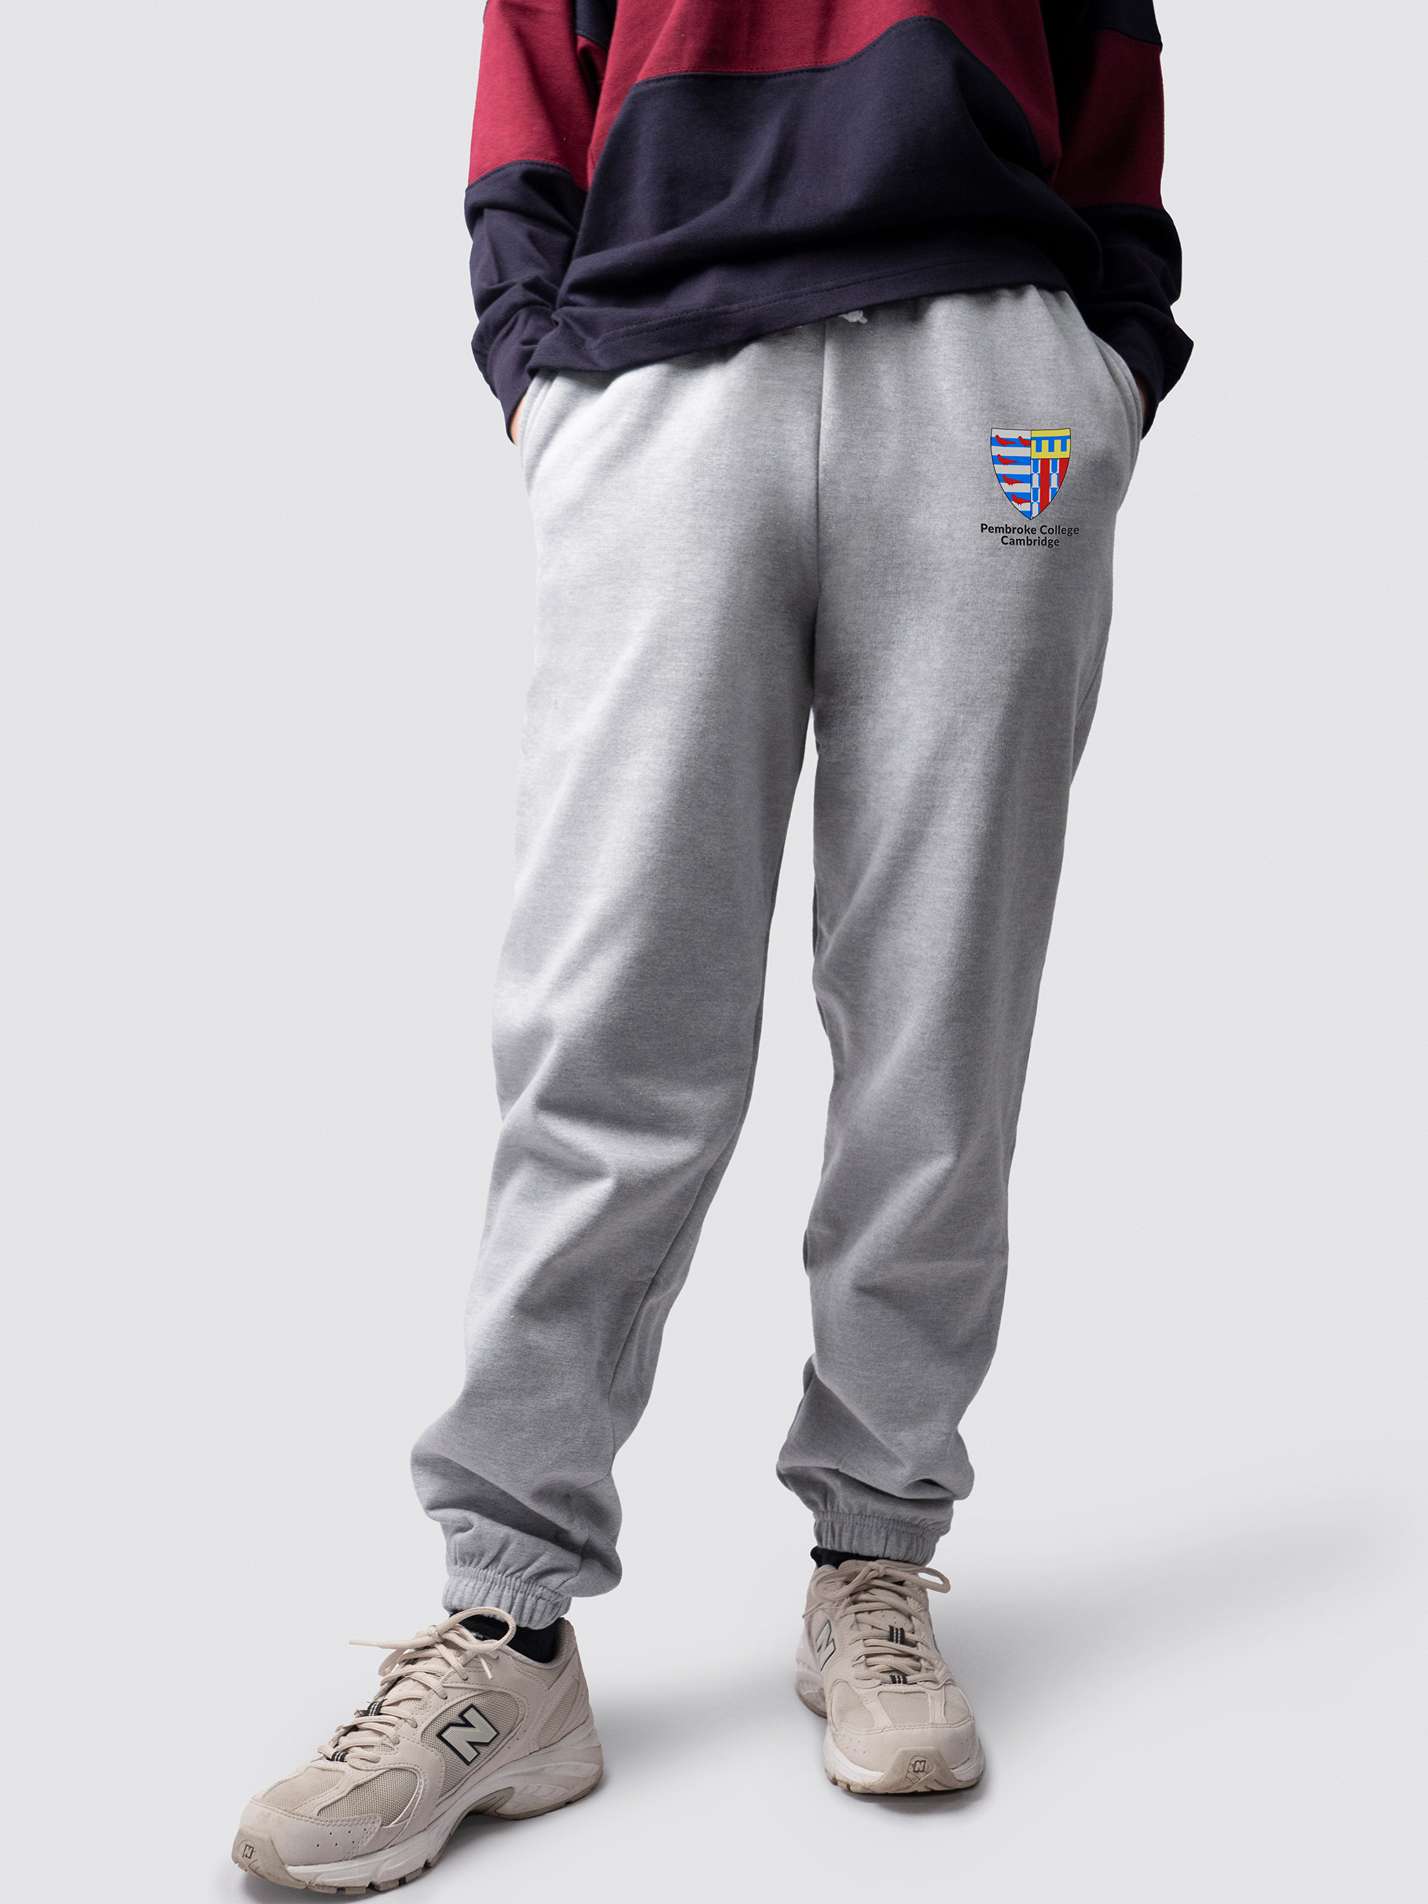 undergraduate cuffed sweatpants, made from soft cotton fabric, with Pembroke logo